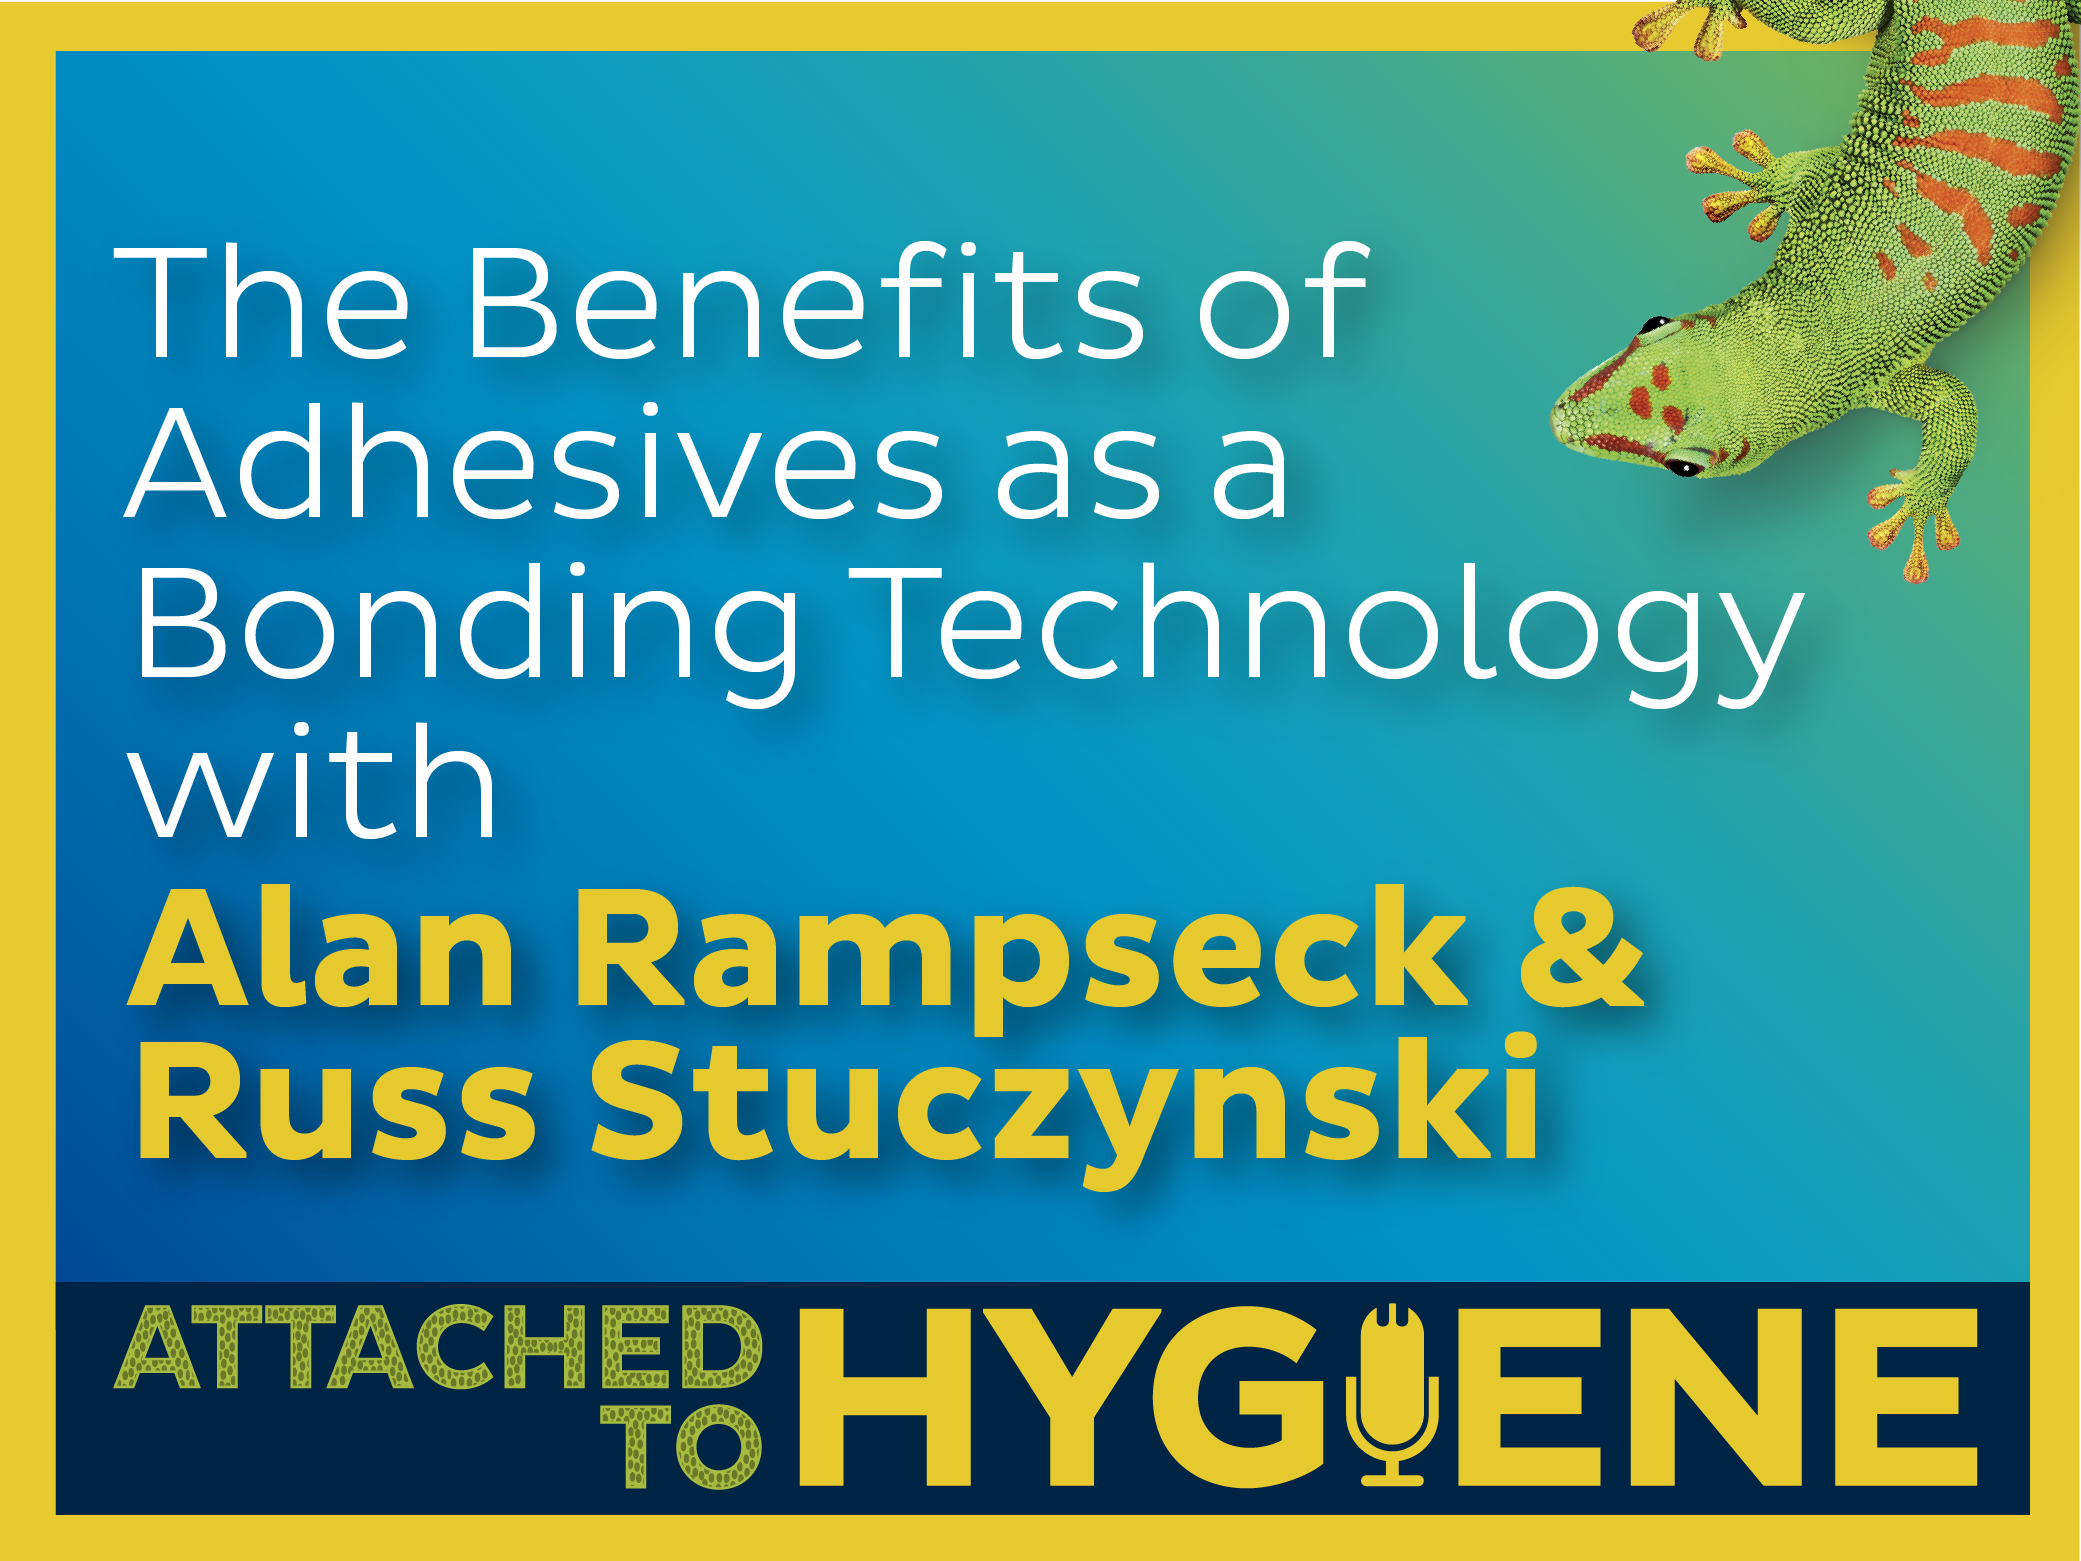 The-Benefits-of-Adhesive-as-a-Bonding-Technology-with-Alan-Ramspeck-and-Russ-Stuczynski